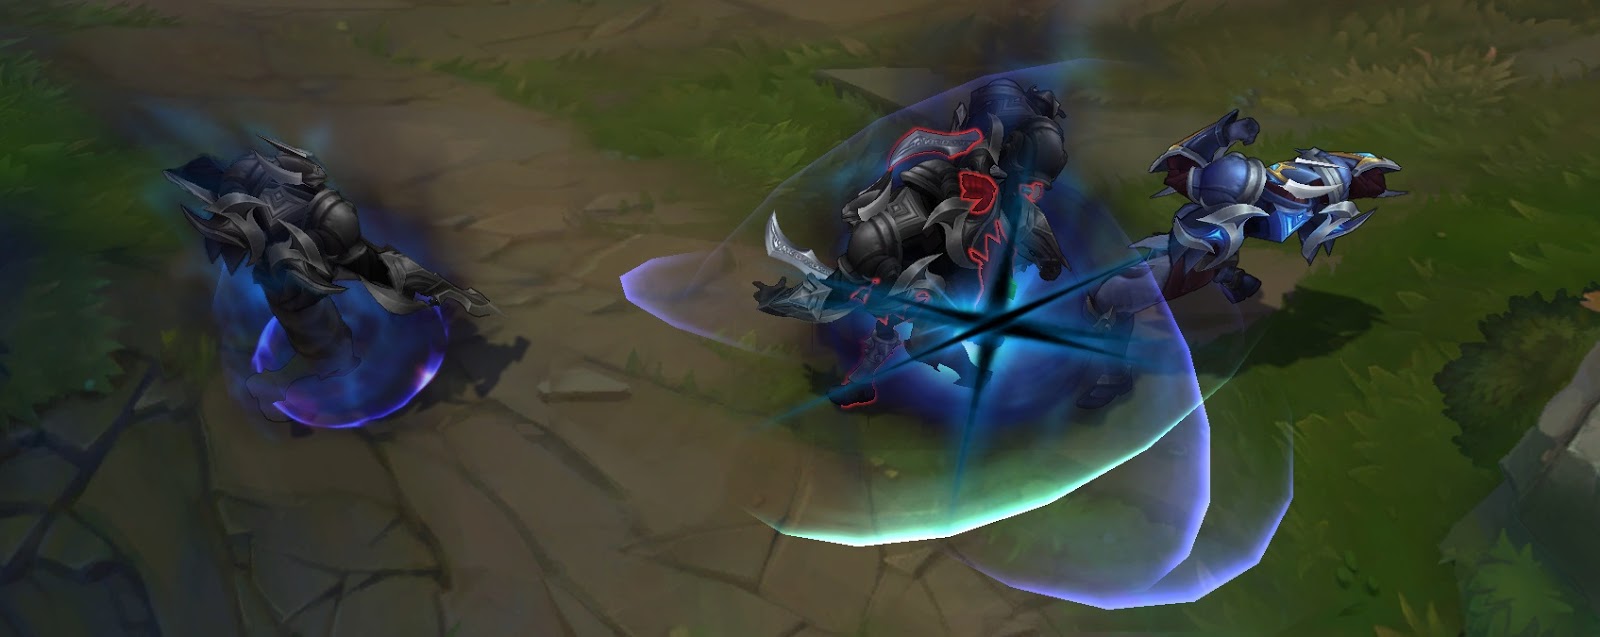 Surrender At Worlds 16 Hits The Rift Championship Zed Legacy Content And More Now Available